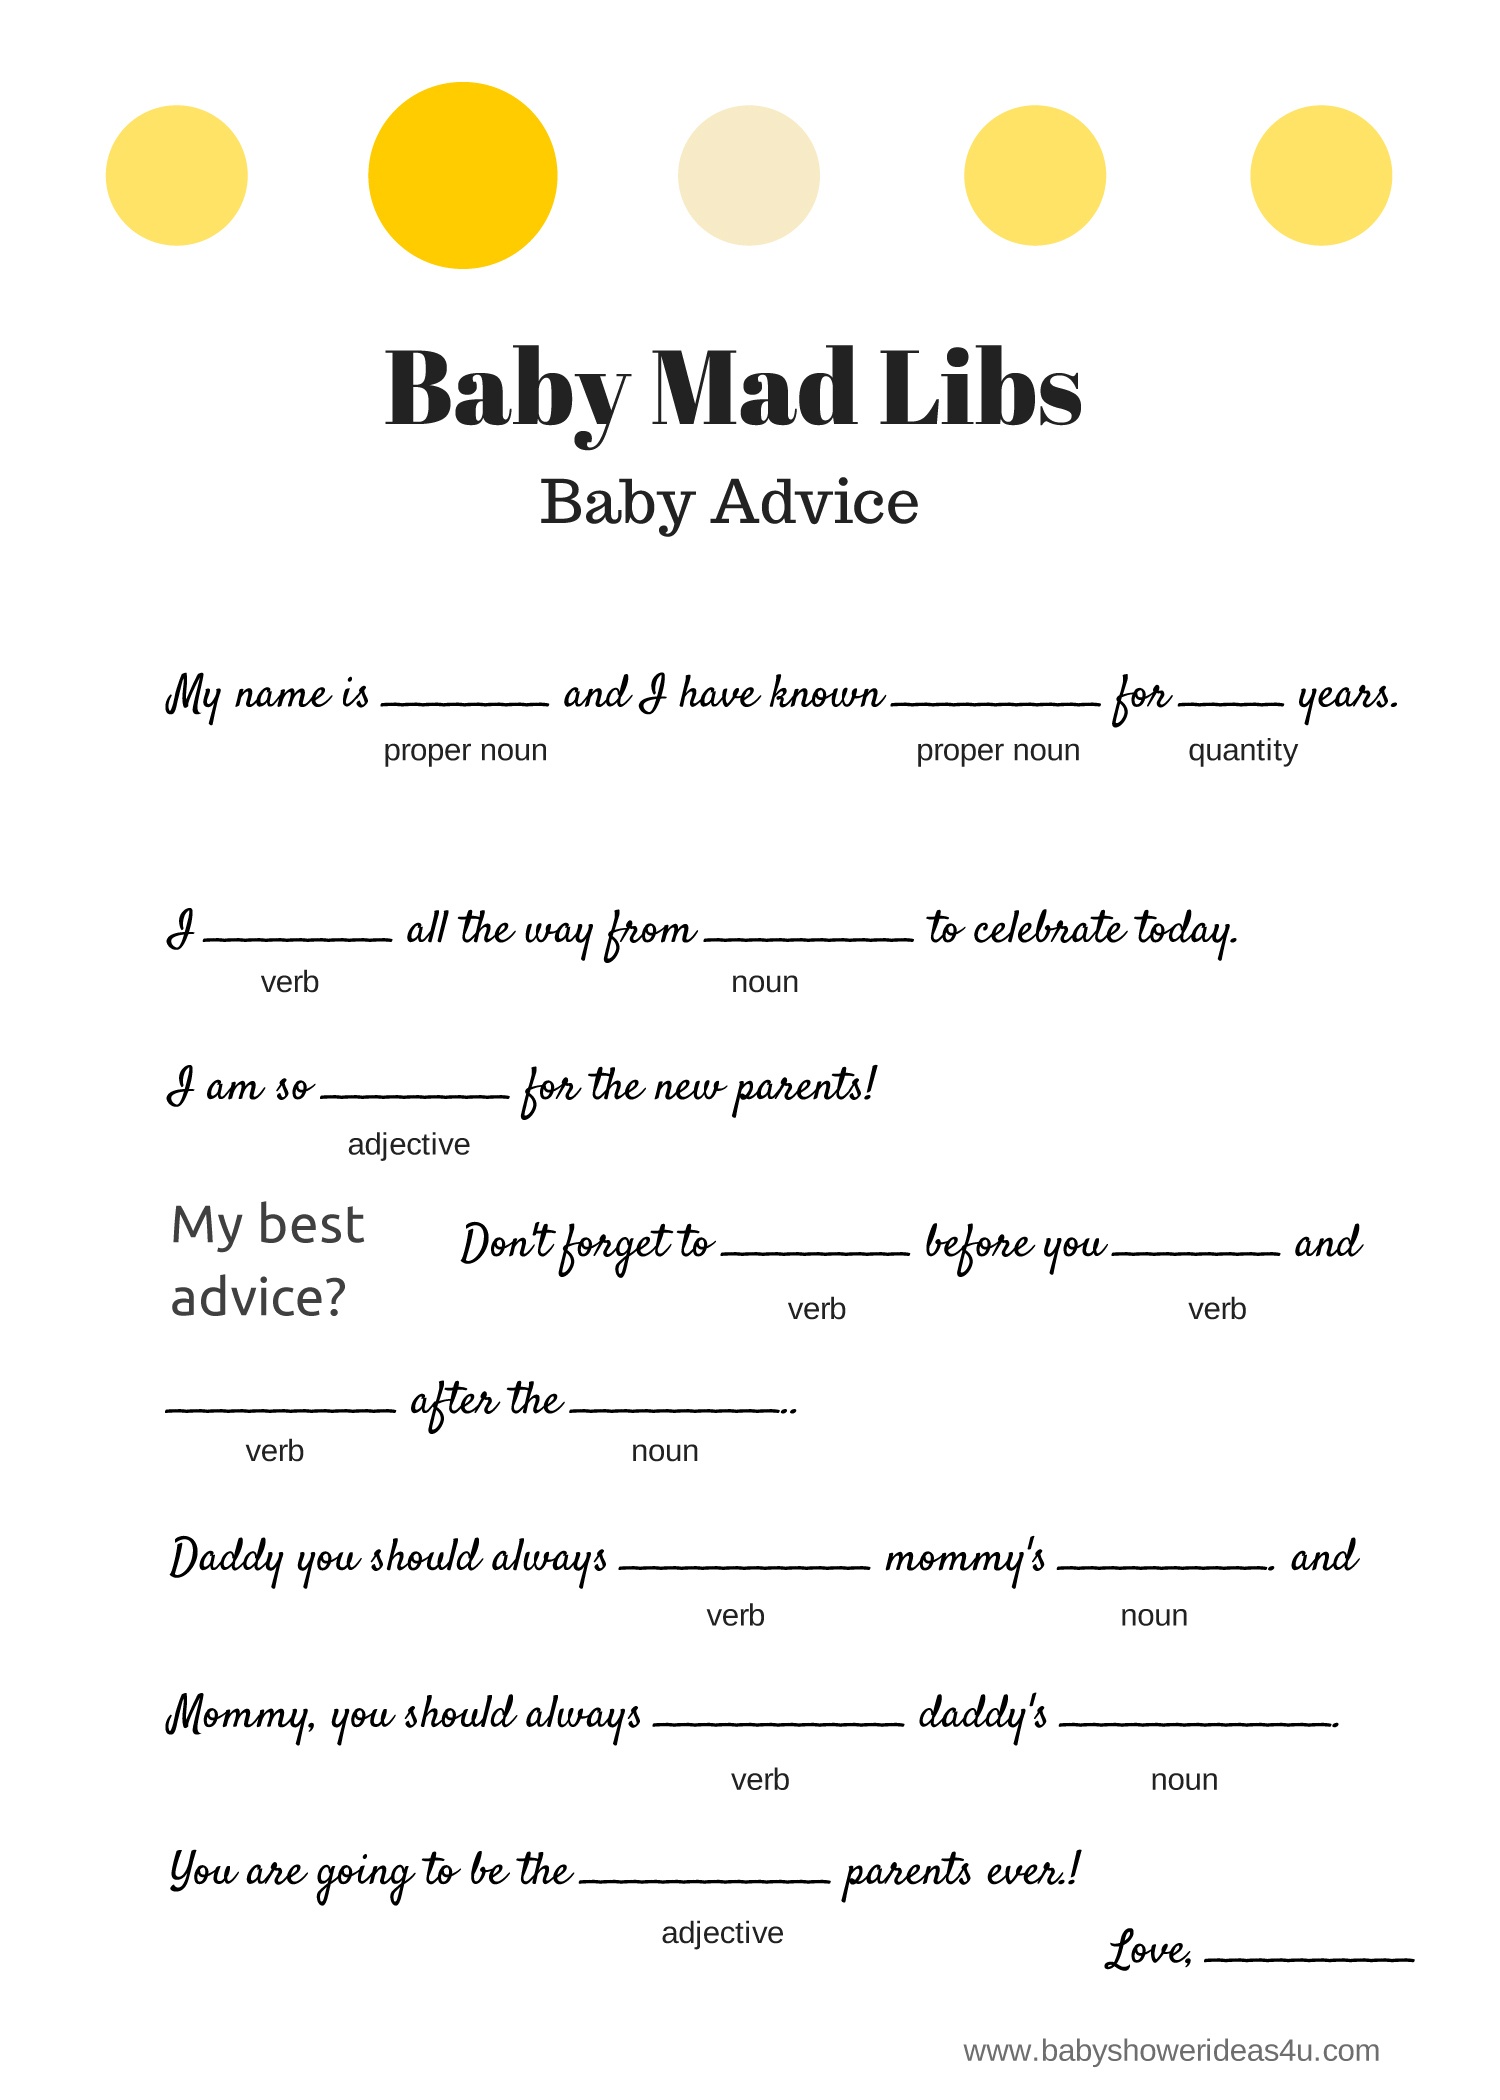 Free Baby Mad Libs Game - Baby Advice - Baby Shower Ideas - Themes - Mad Libs Online Printable Free